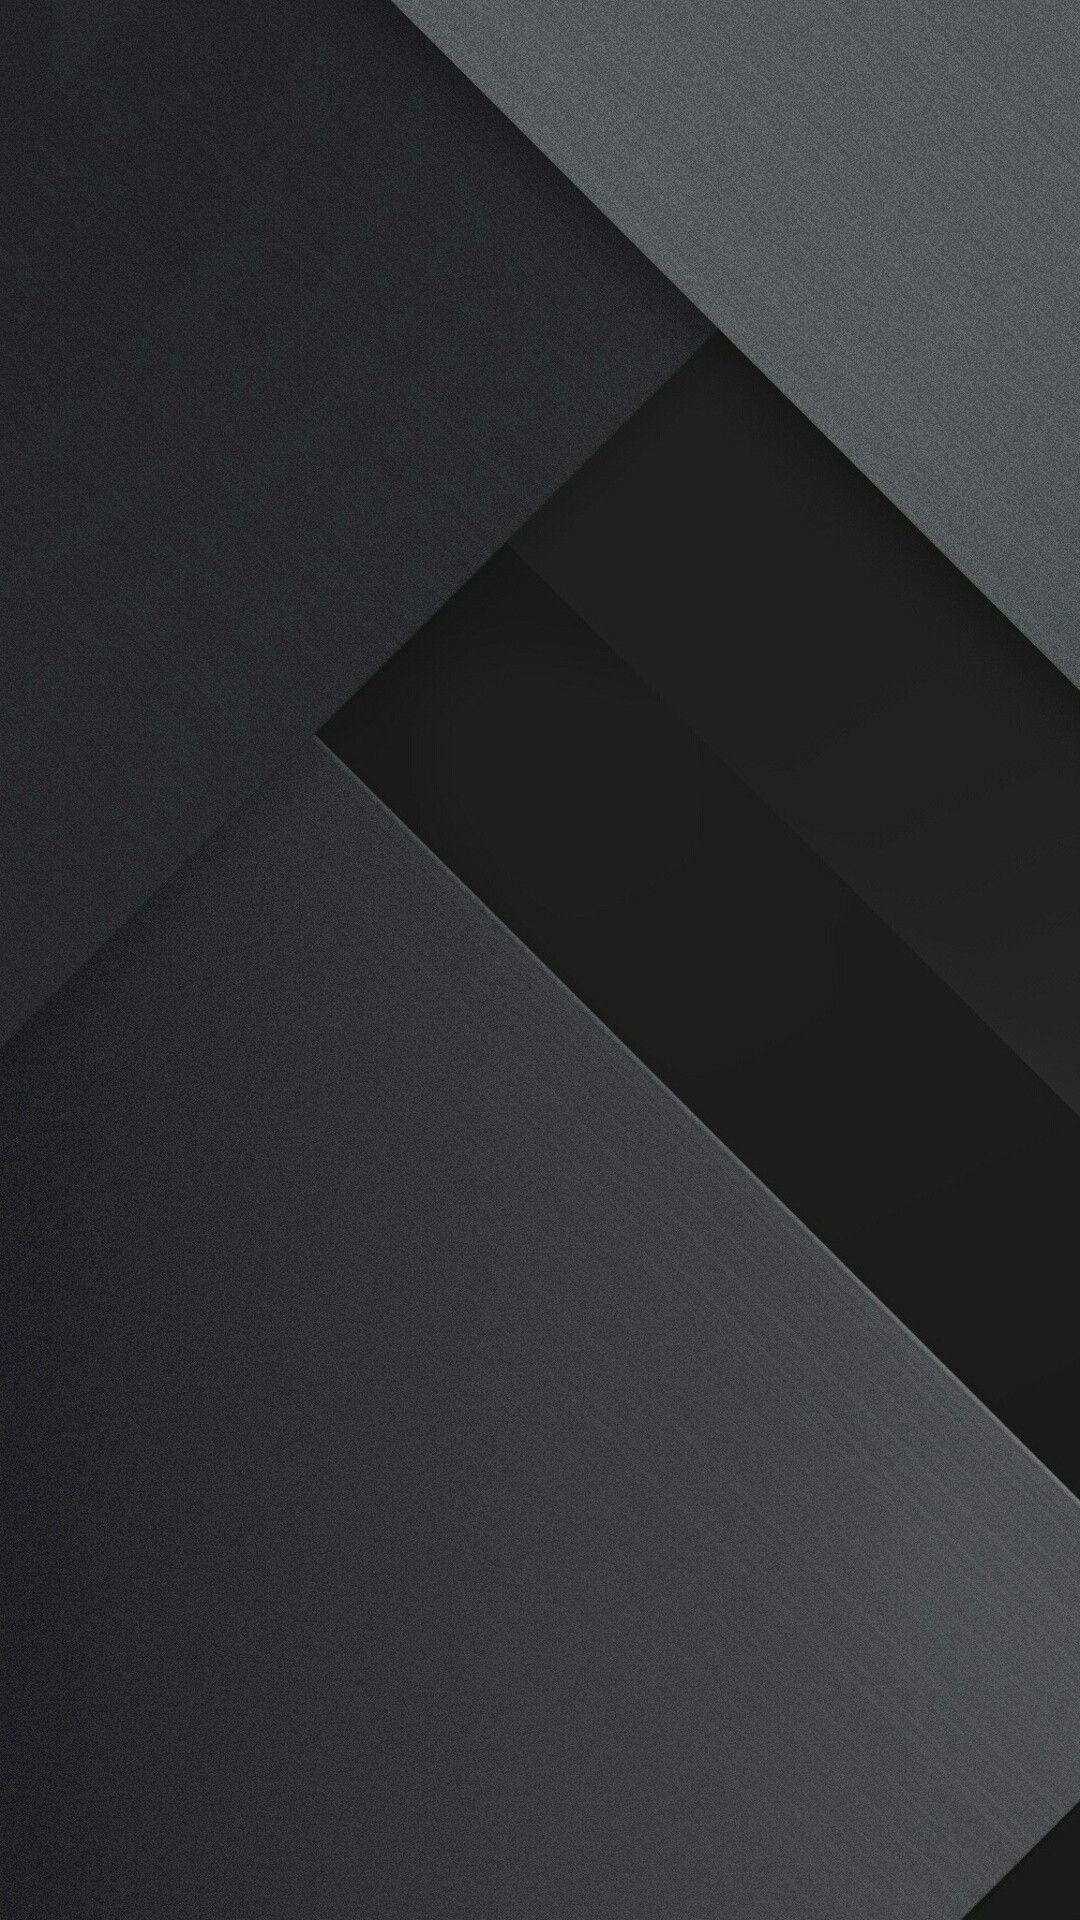 Grey Mobile Wallpaper Free Grey Mobile Background